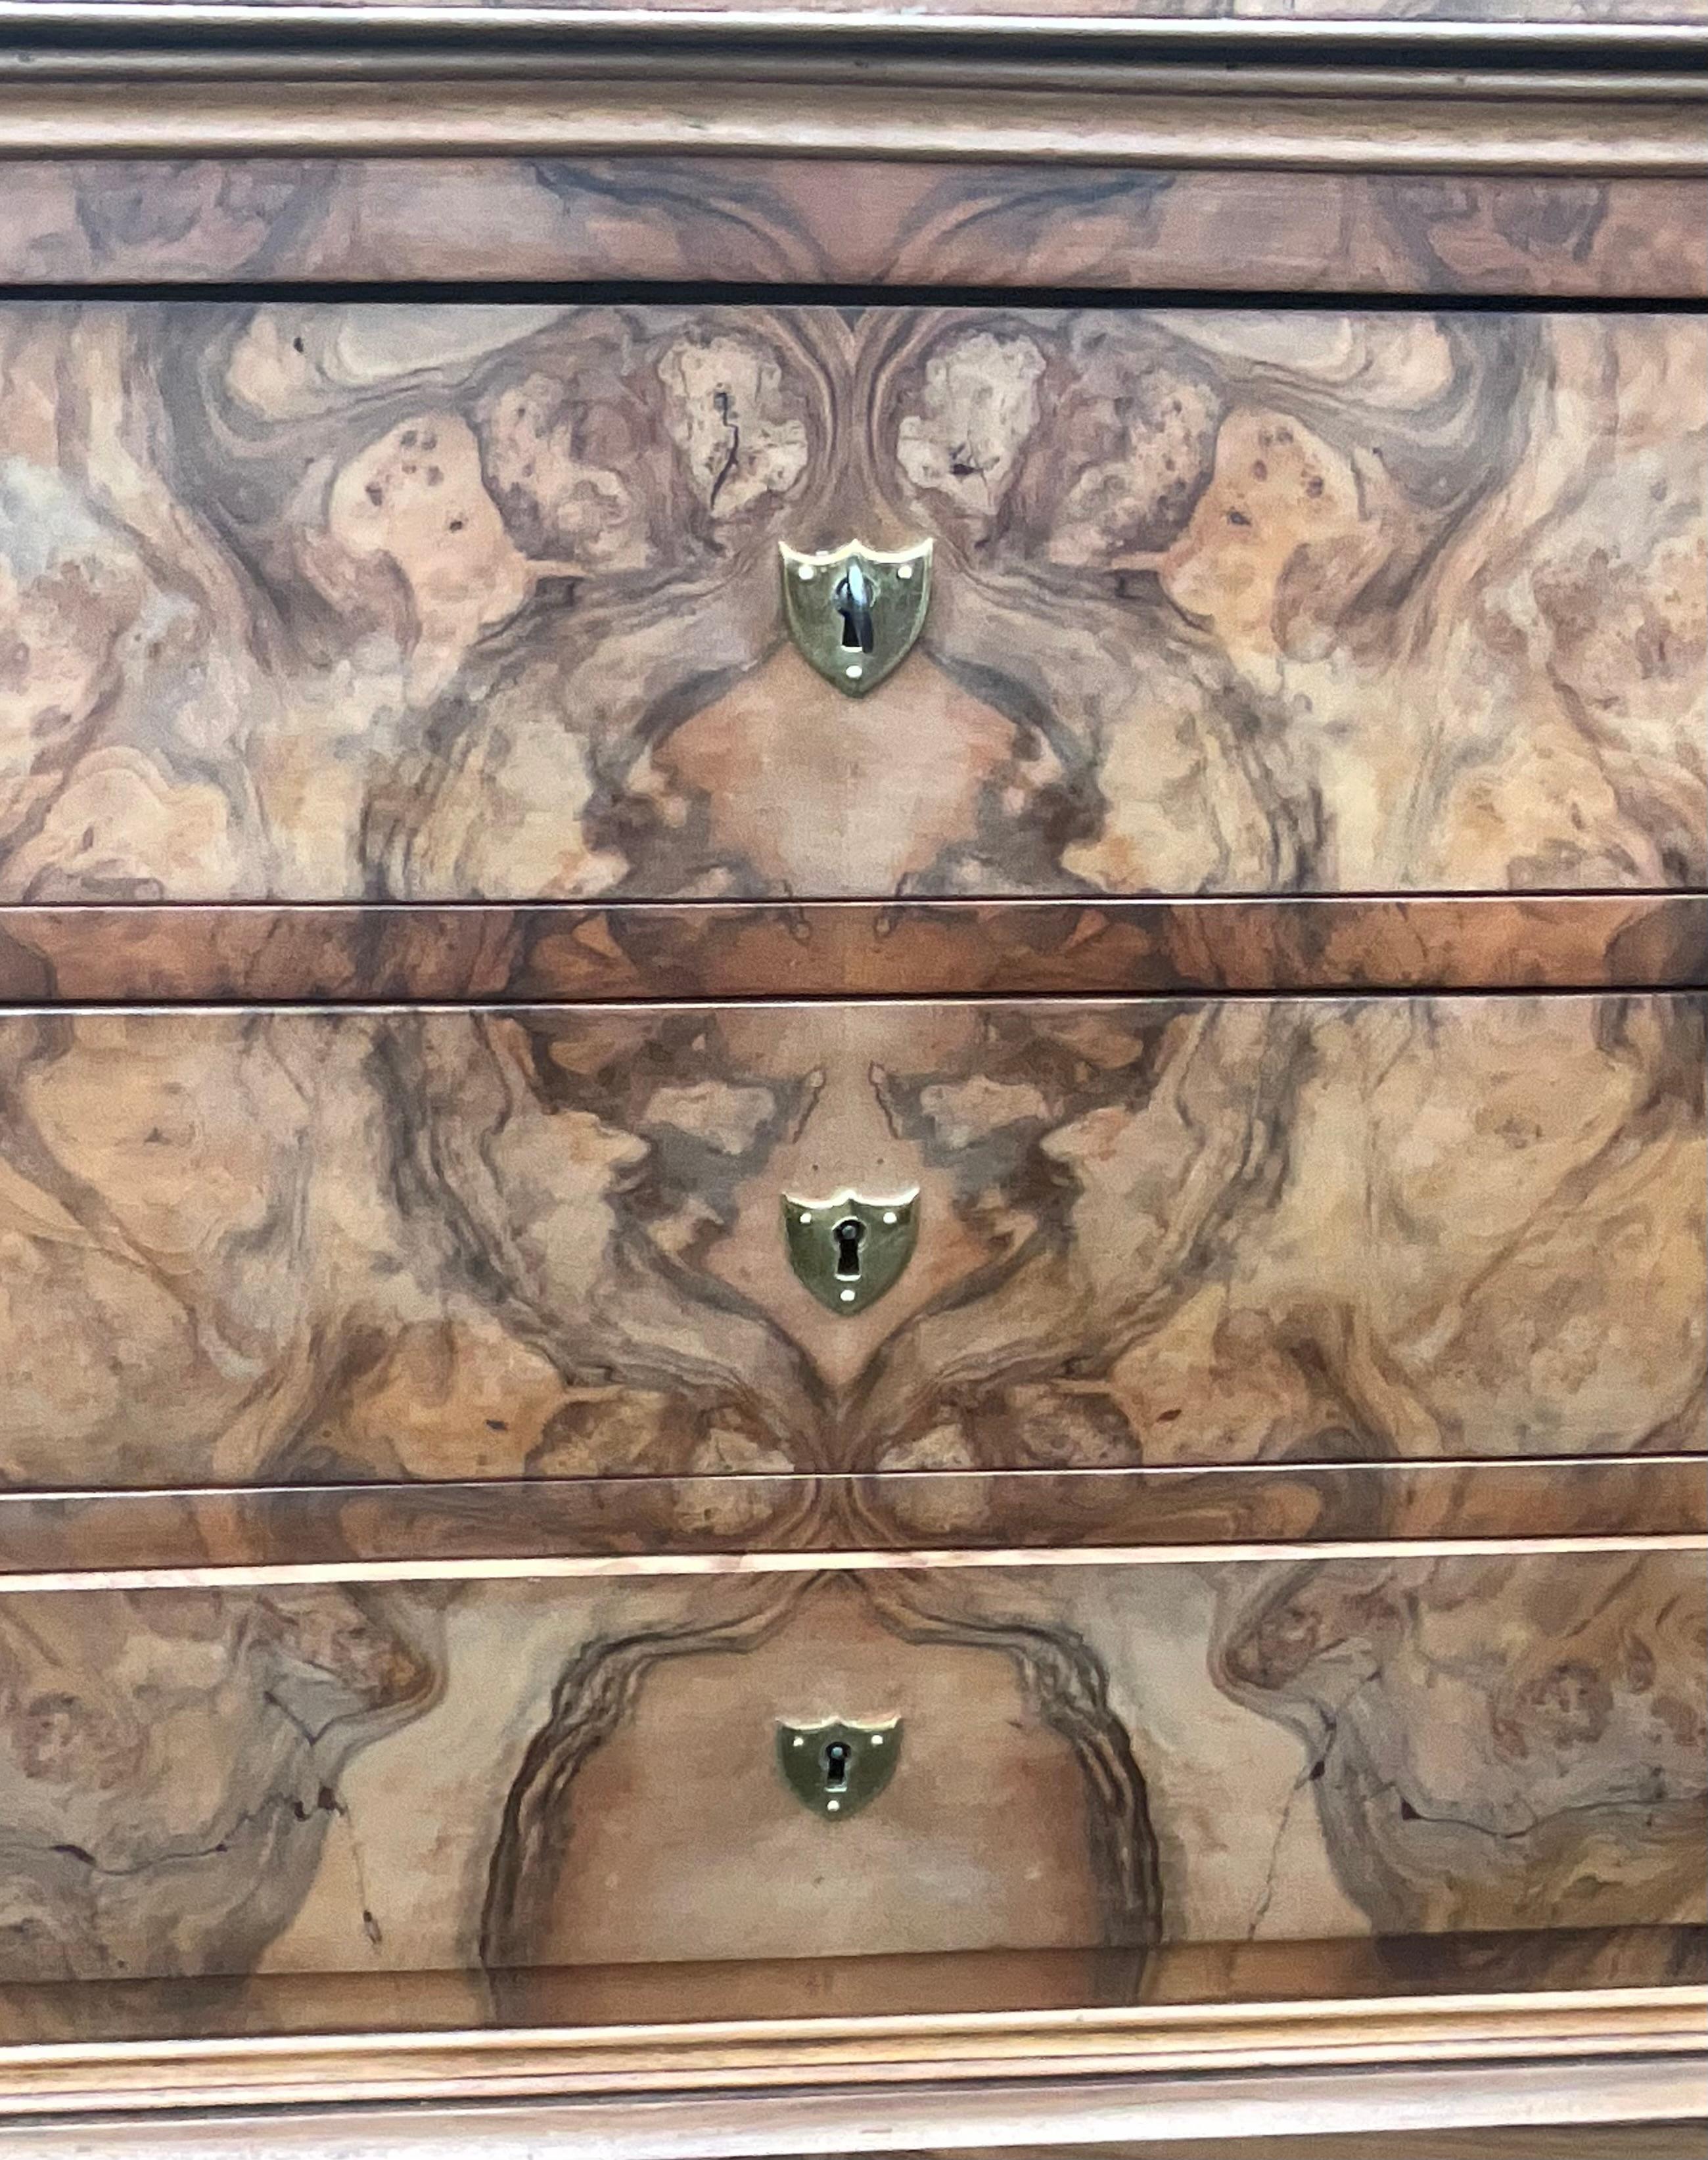 French Louis Philippe chest of drawers late 19th century. The wood is walnut bramble.

Walnut brambles are flamed because they have many aesthetic designs. These drawings have complex, highly contrasting patterns and intricate veins on a naturally